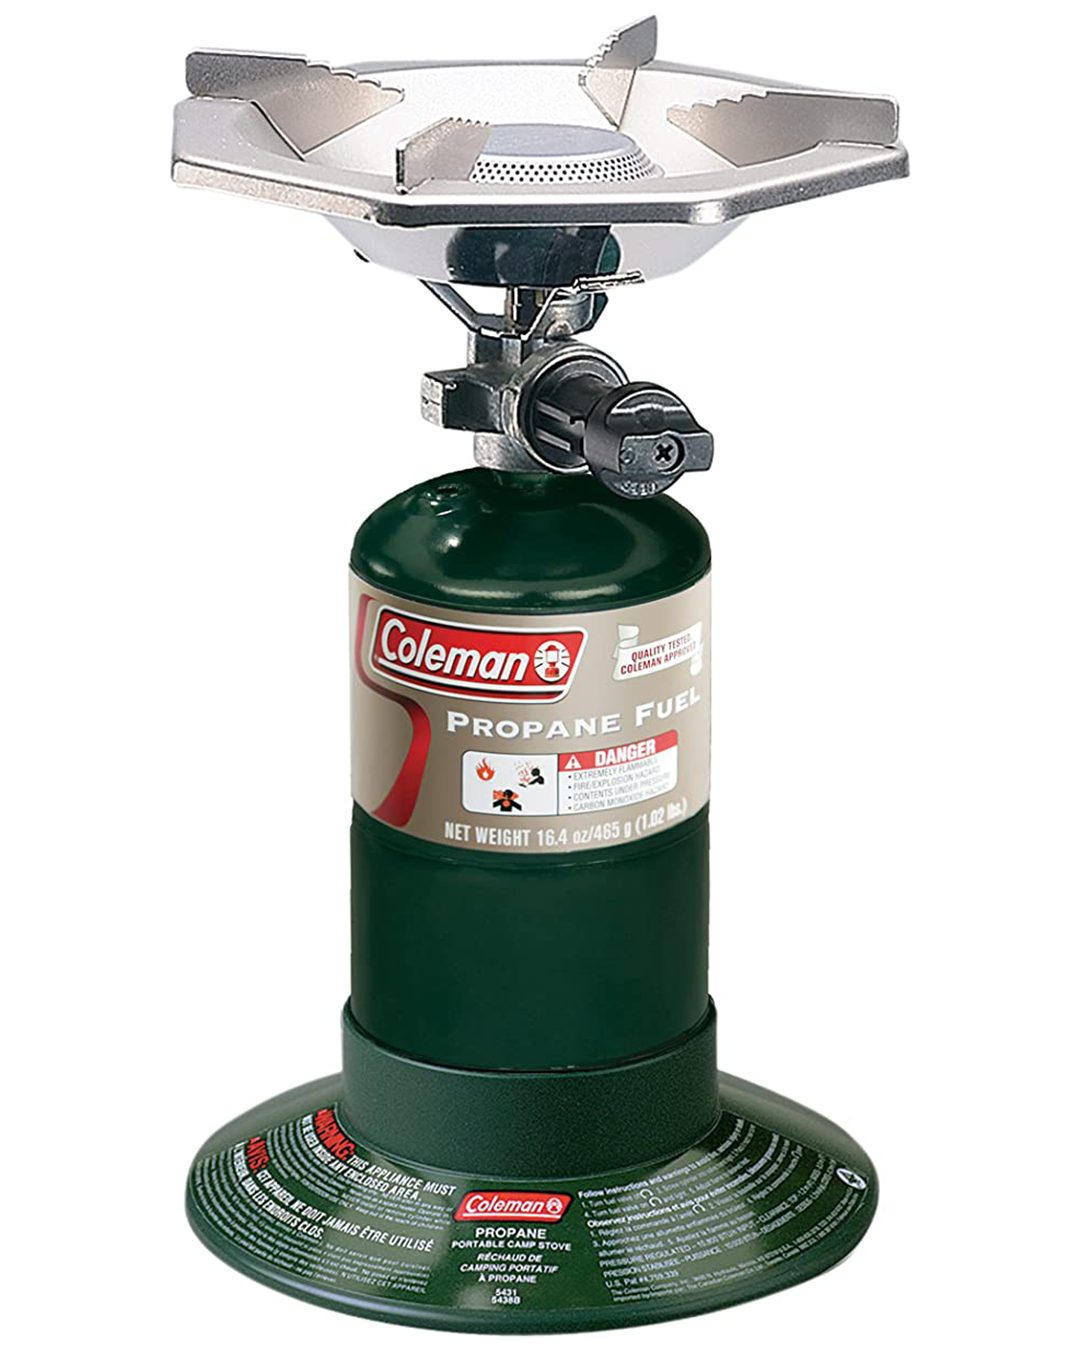 Camping gear | A small camp stove